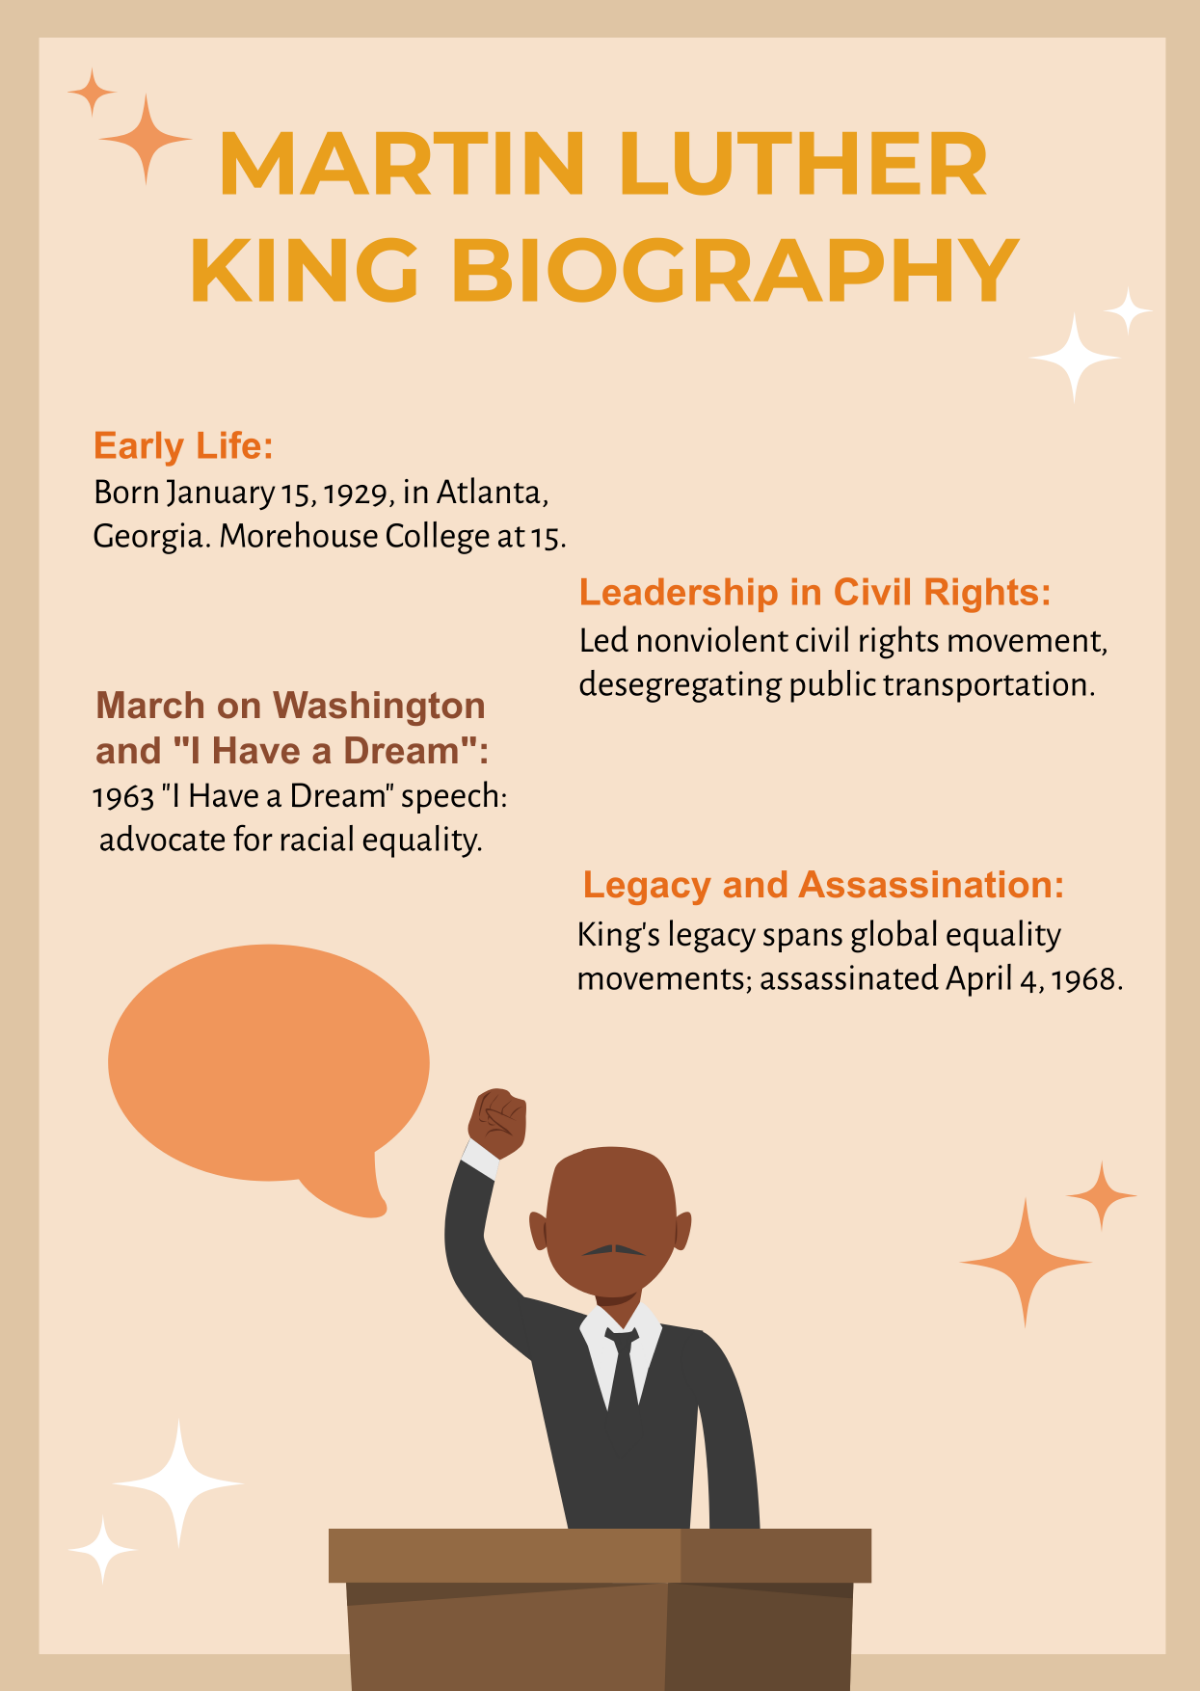 Martin Luther King Biography for Students